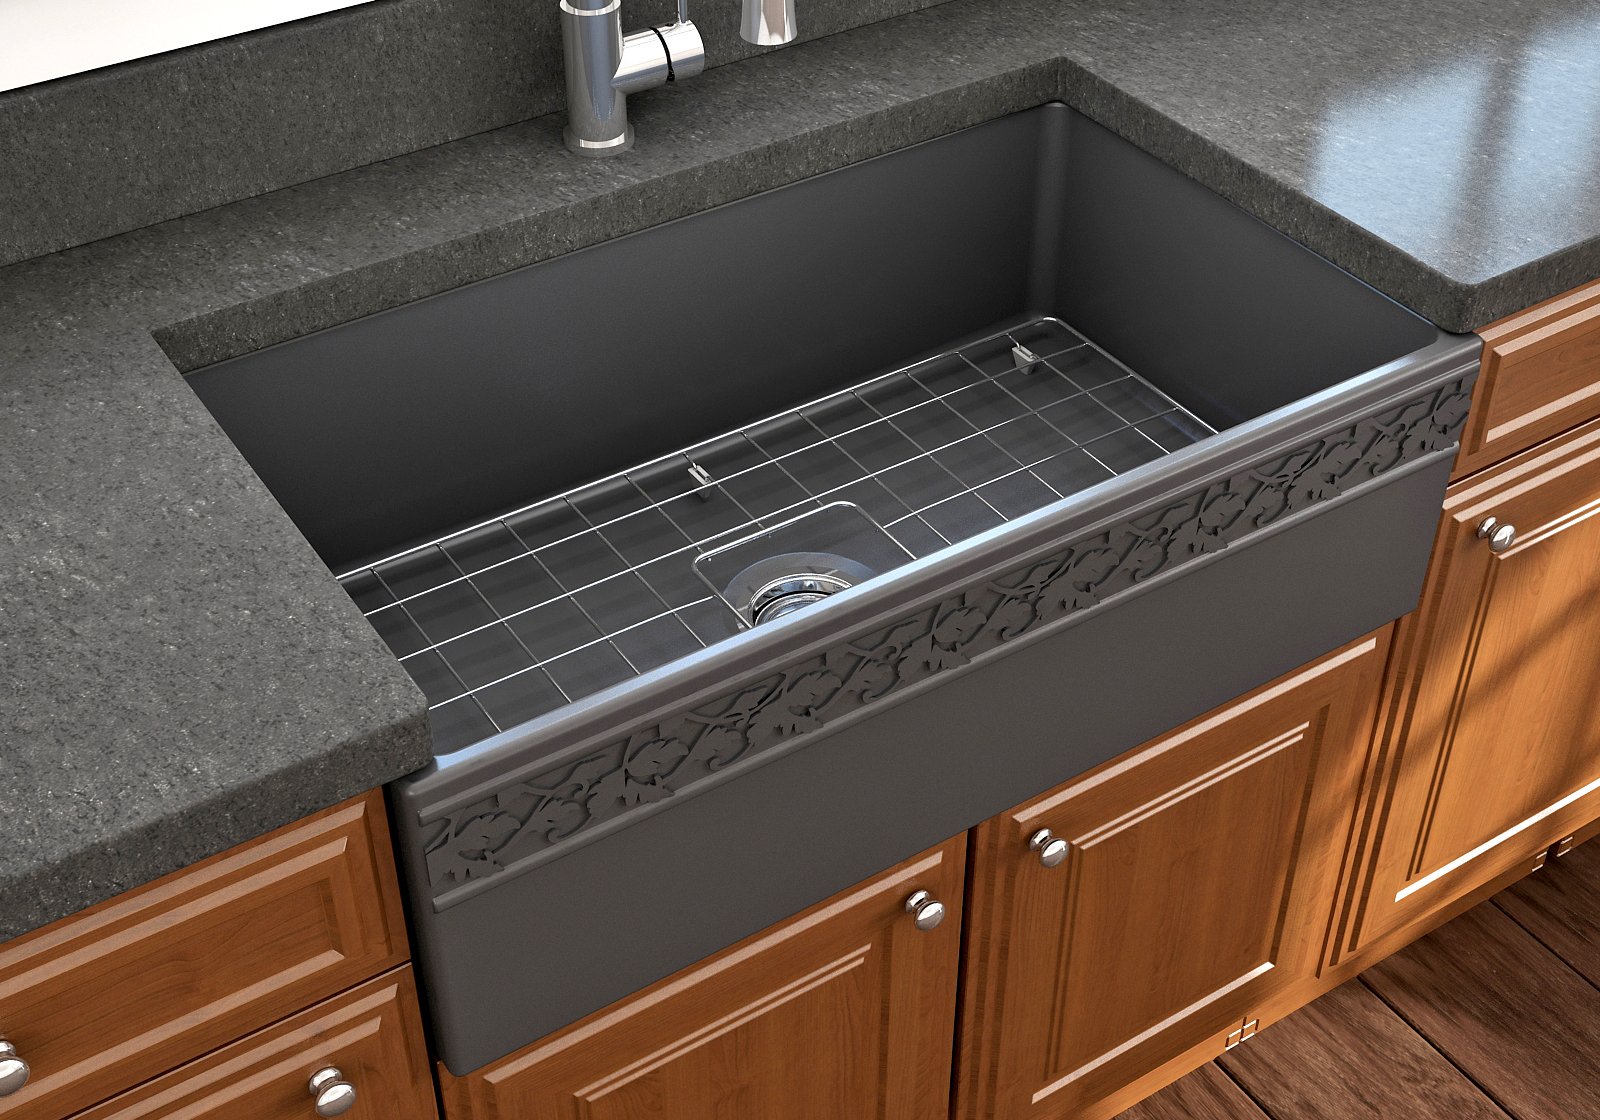 Bocchi Vigneto Apron Front Fireclay 33" Single Bowl Kitchen Sink with Protective Bottom Grid and Strainer, Available in 9 colors!